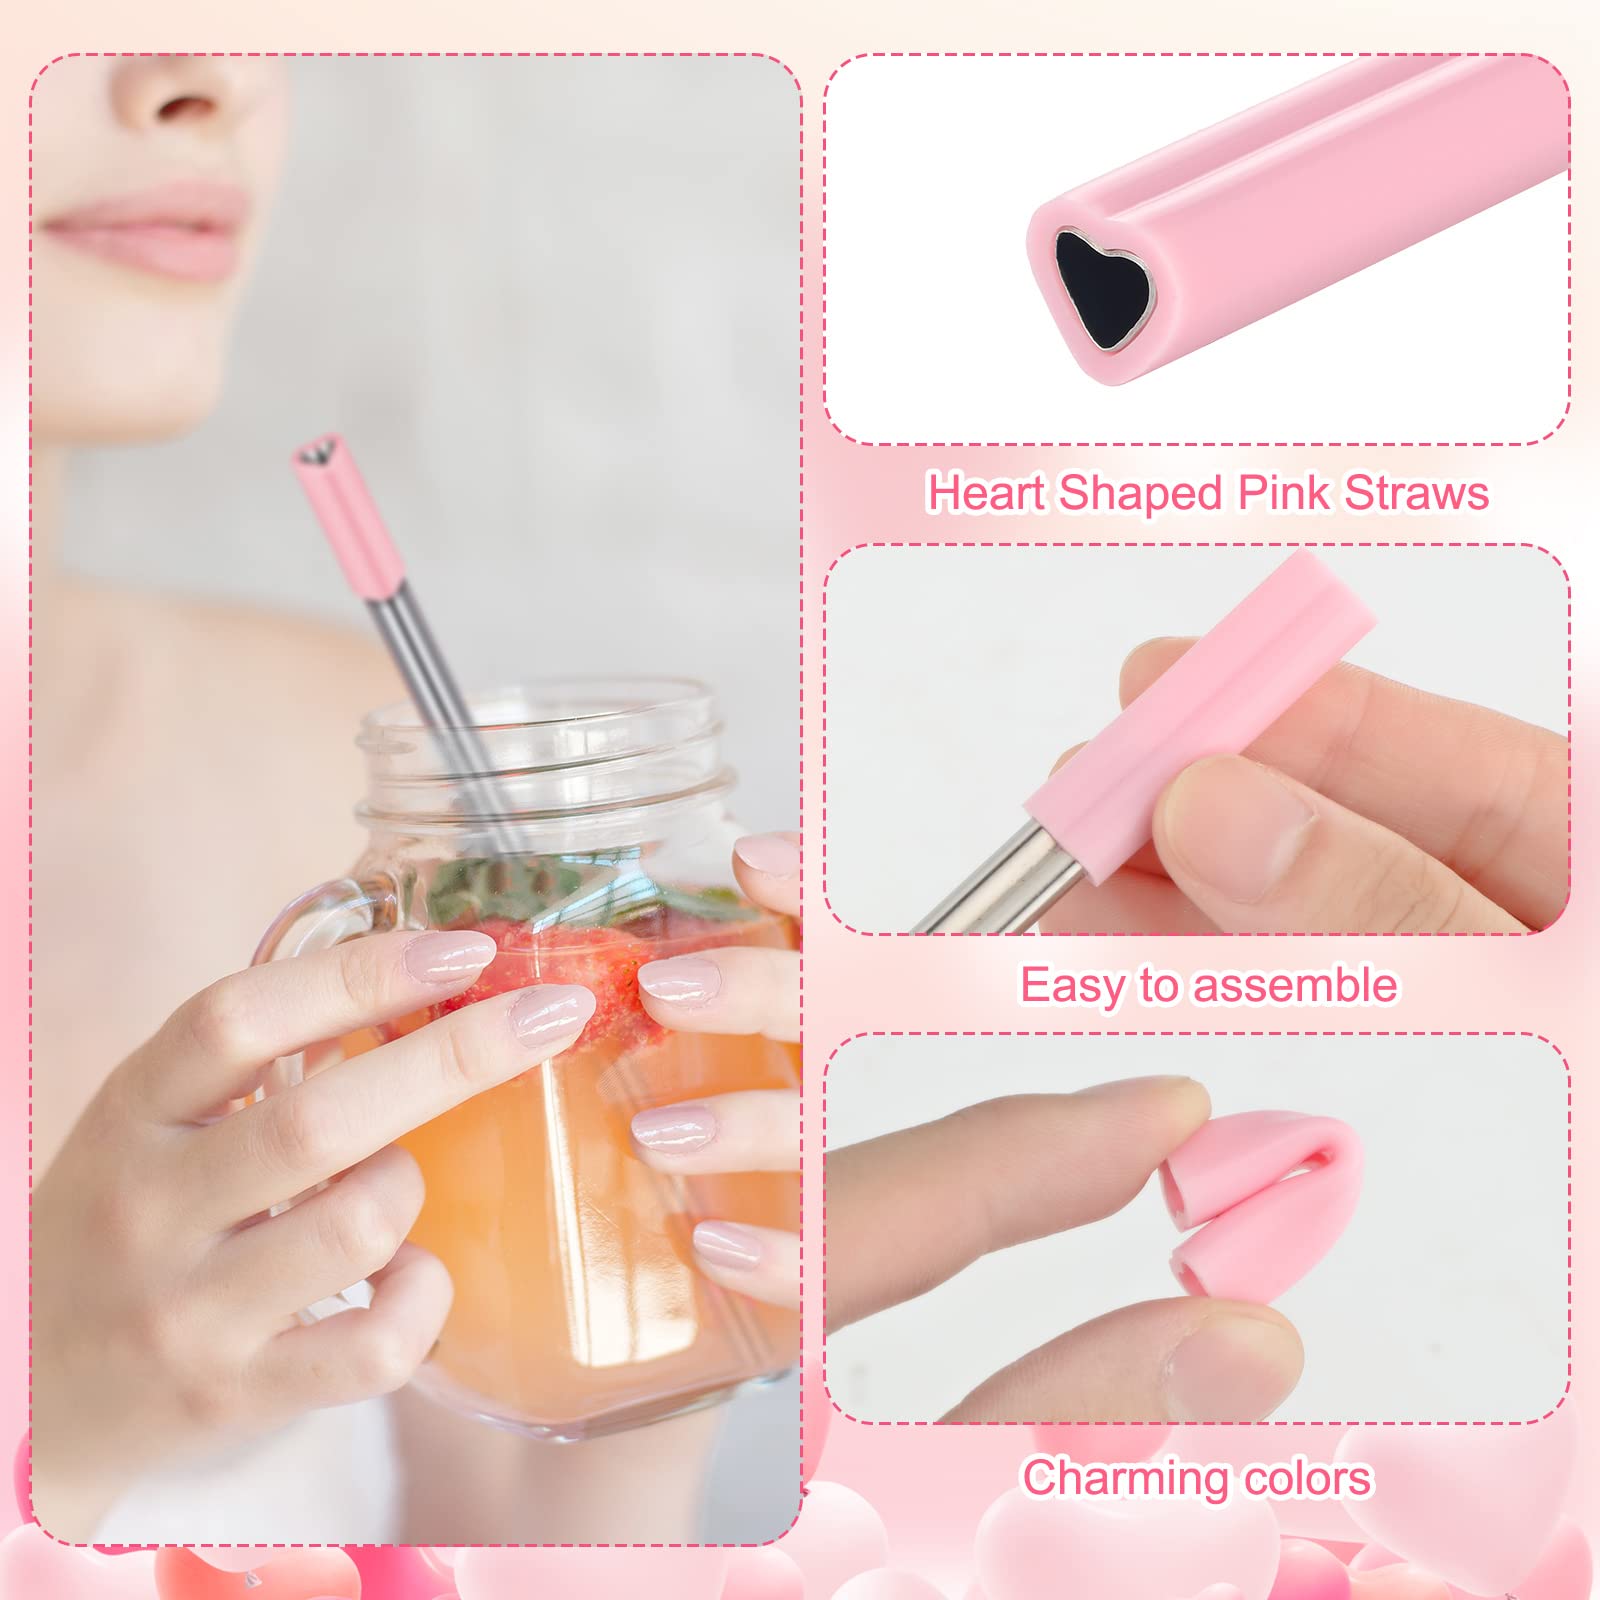 Jutom 8 Pack Heart Shaped Stainless Steel Straws with Silicone Tips Reusable Heart Straws Cute Straws with 2 Cleaning Brushes for Hot Cold Drinks Valentine's Day Bridal Shower Wedding (Pink)